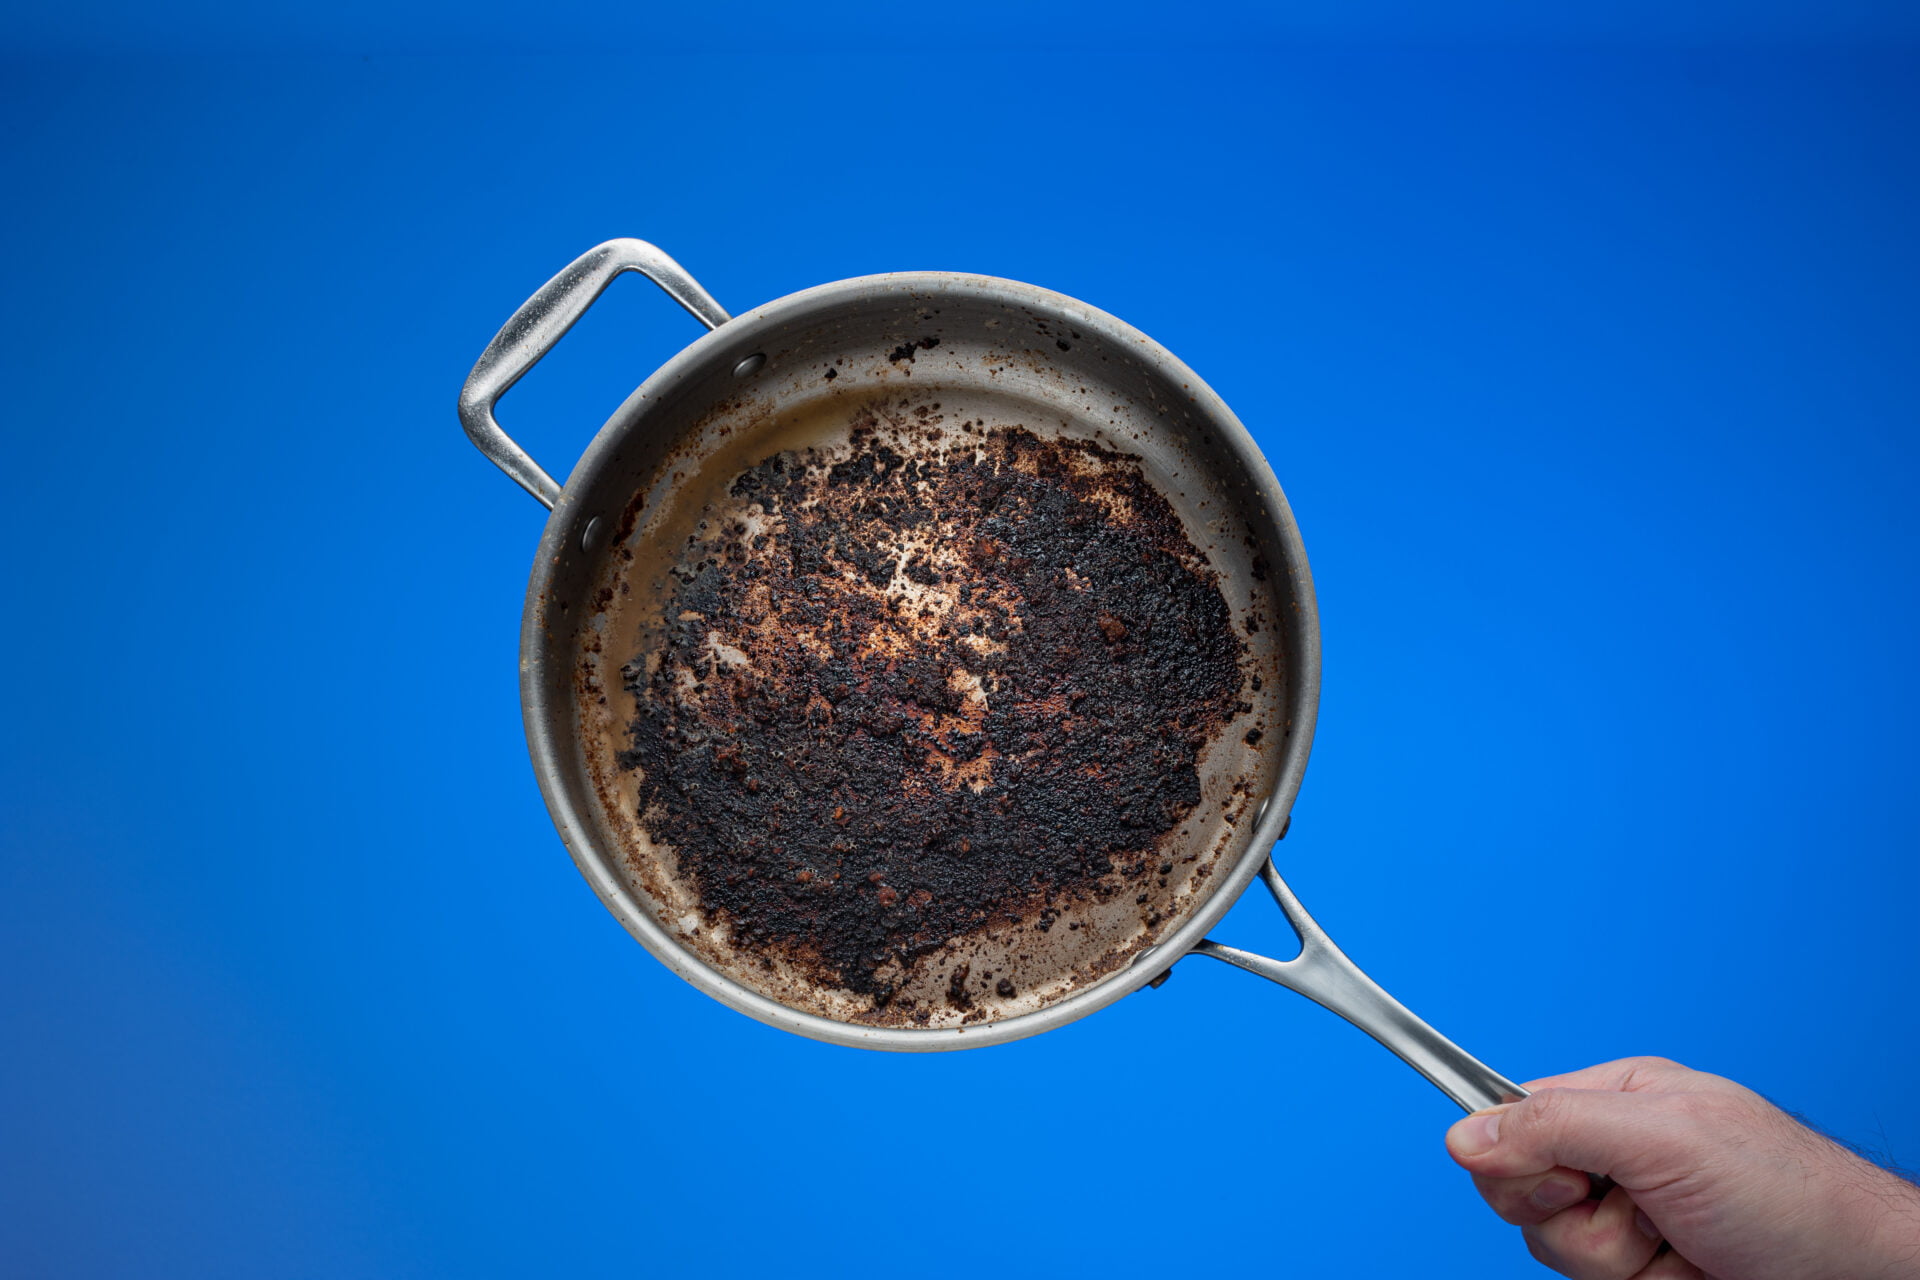 If You've Purchased HexClad Cookware, You May Want to Contact An Attorney